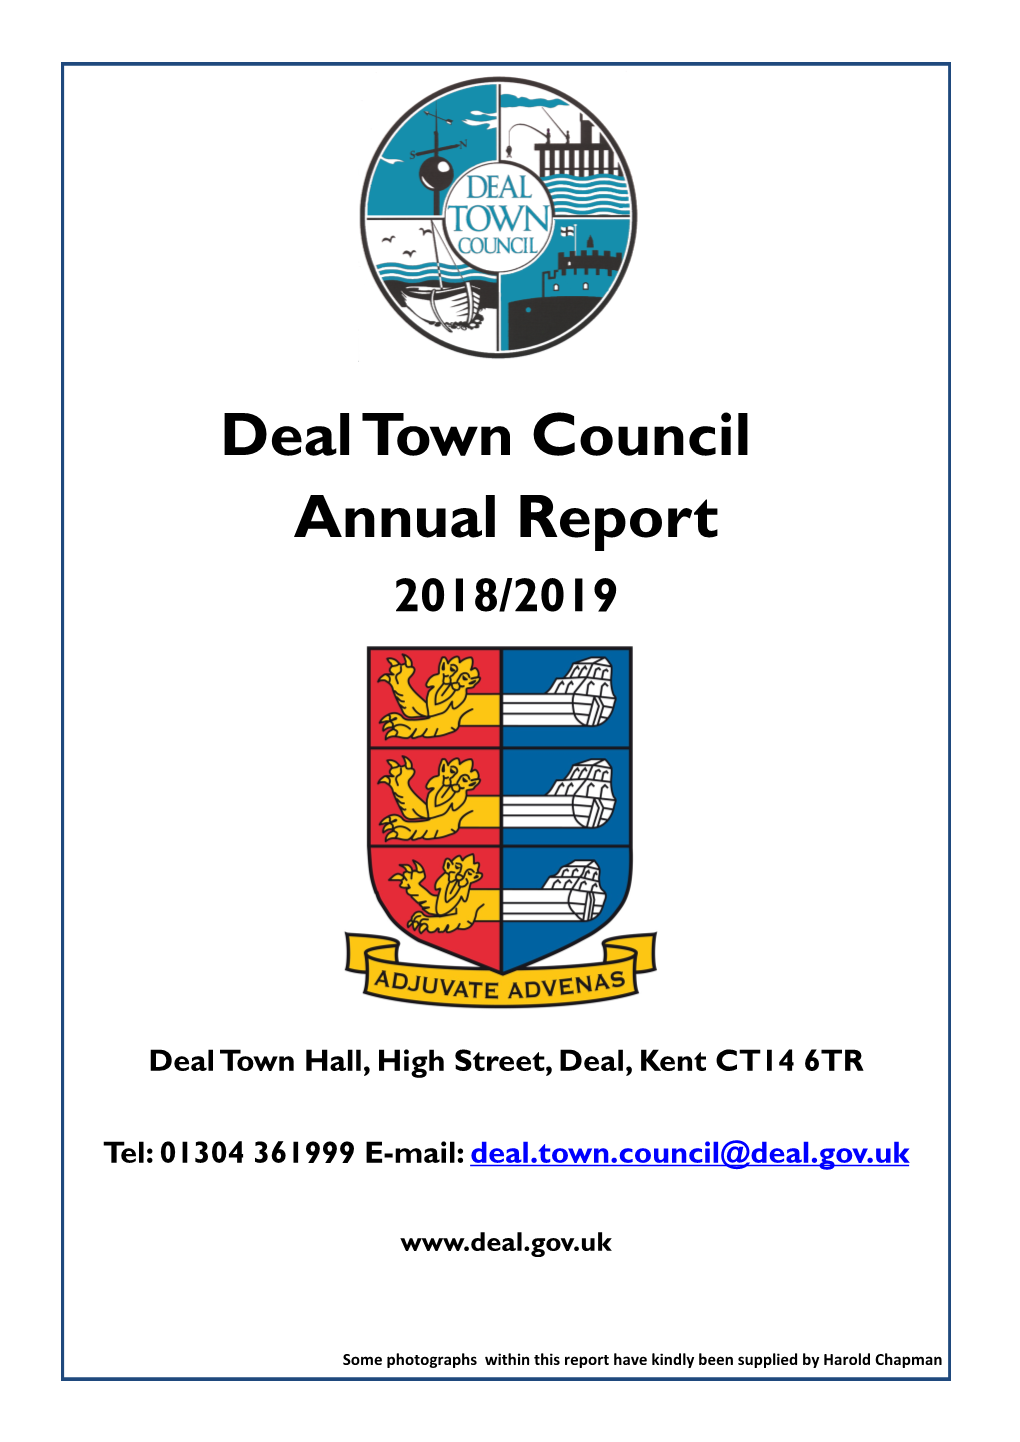 Deal Town Council Annual Report 2018/2019